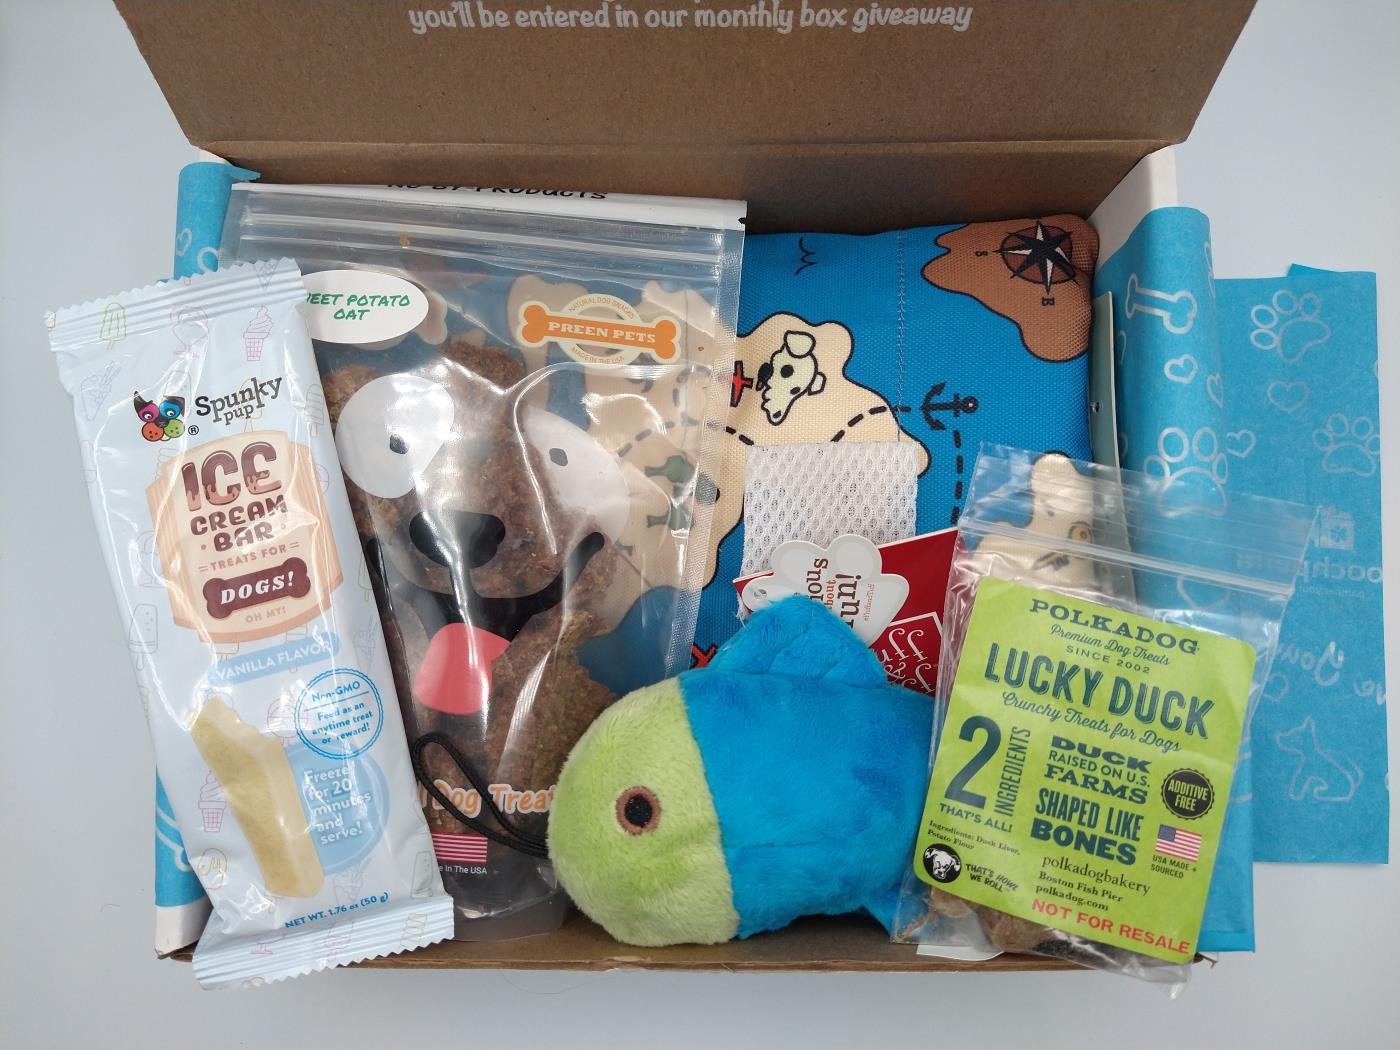 Sample Pooch Perks Box with toys in the shape of a fish and map. The treats are duck, oat and an ice cream treat for the freezer